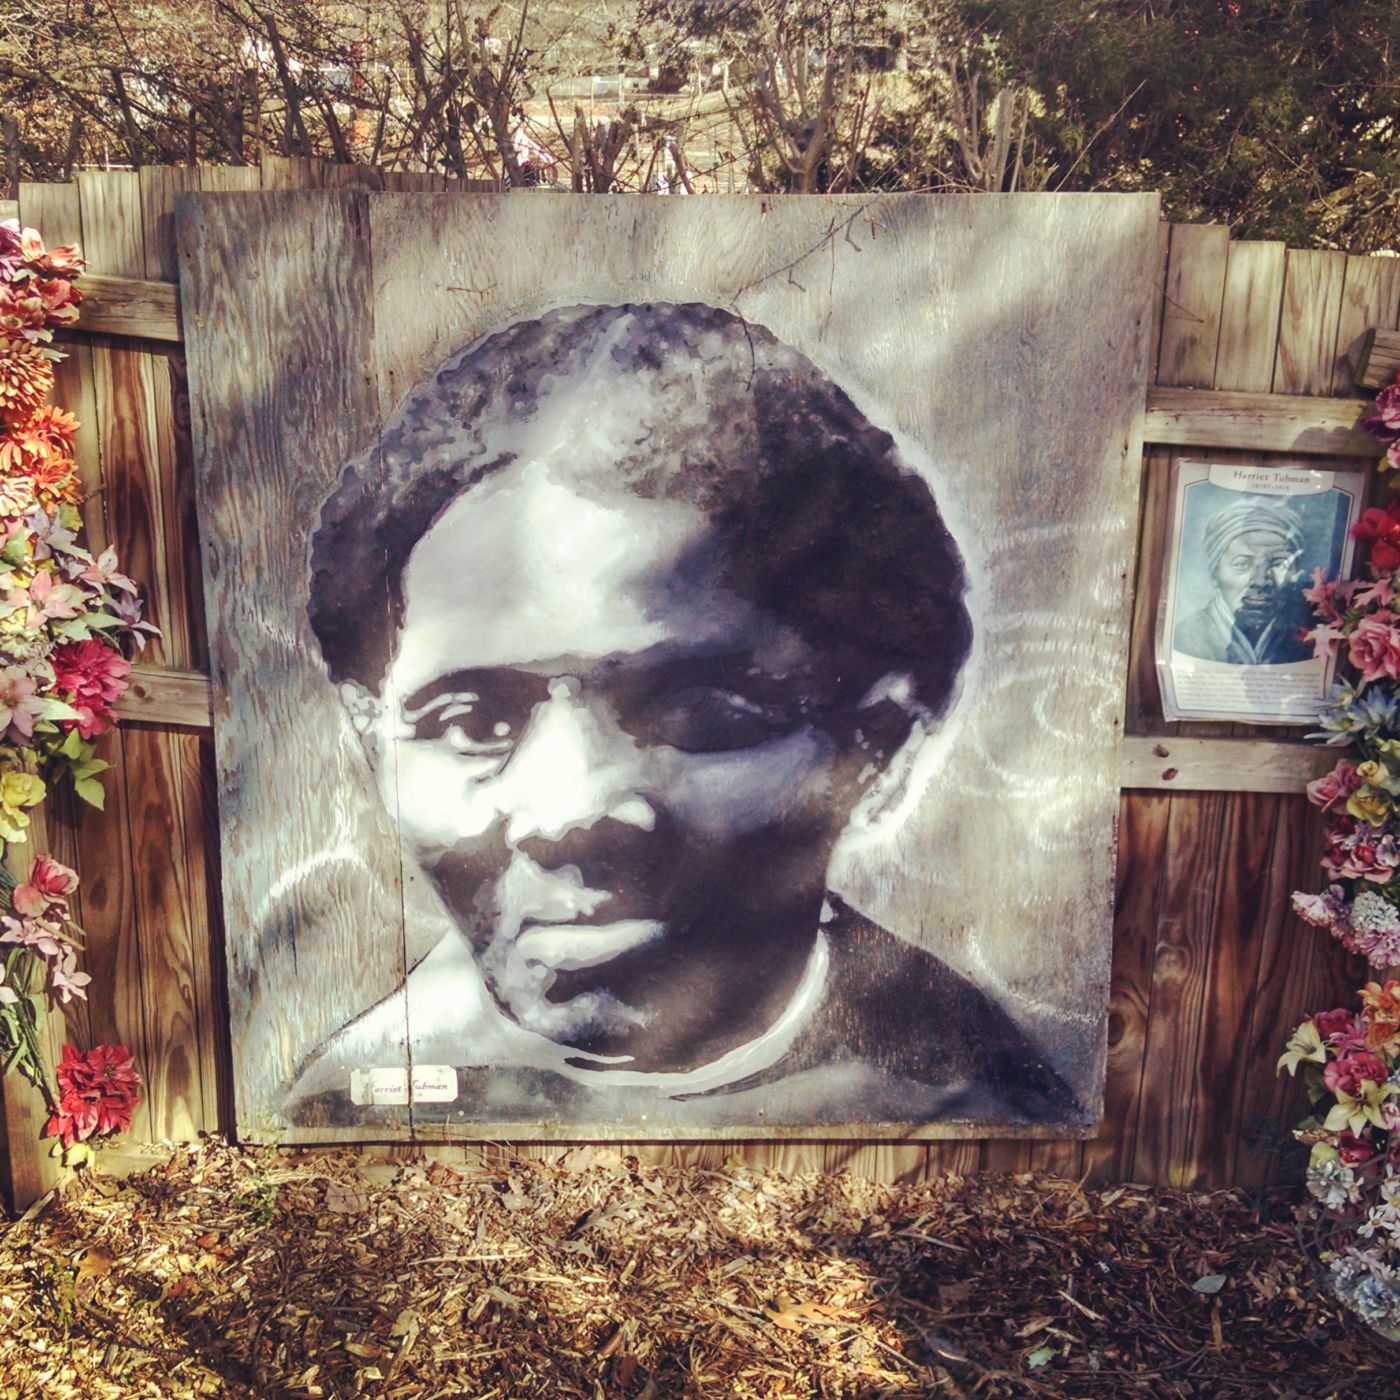 A mural of Harriet Tubman in place at the Burton Street Garden in Asheville, North Carolina.